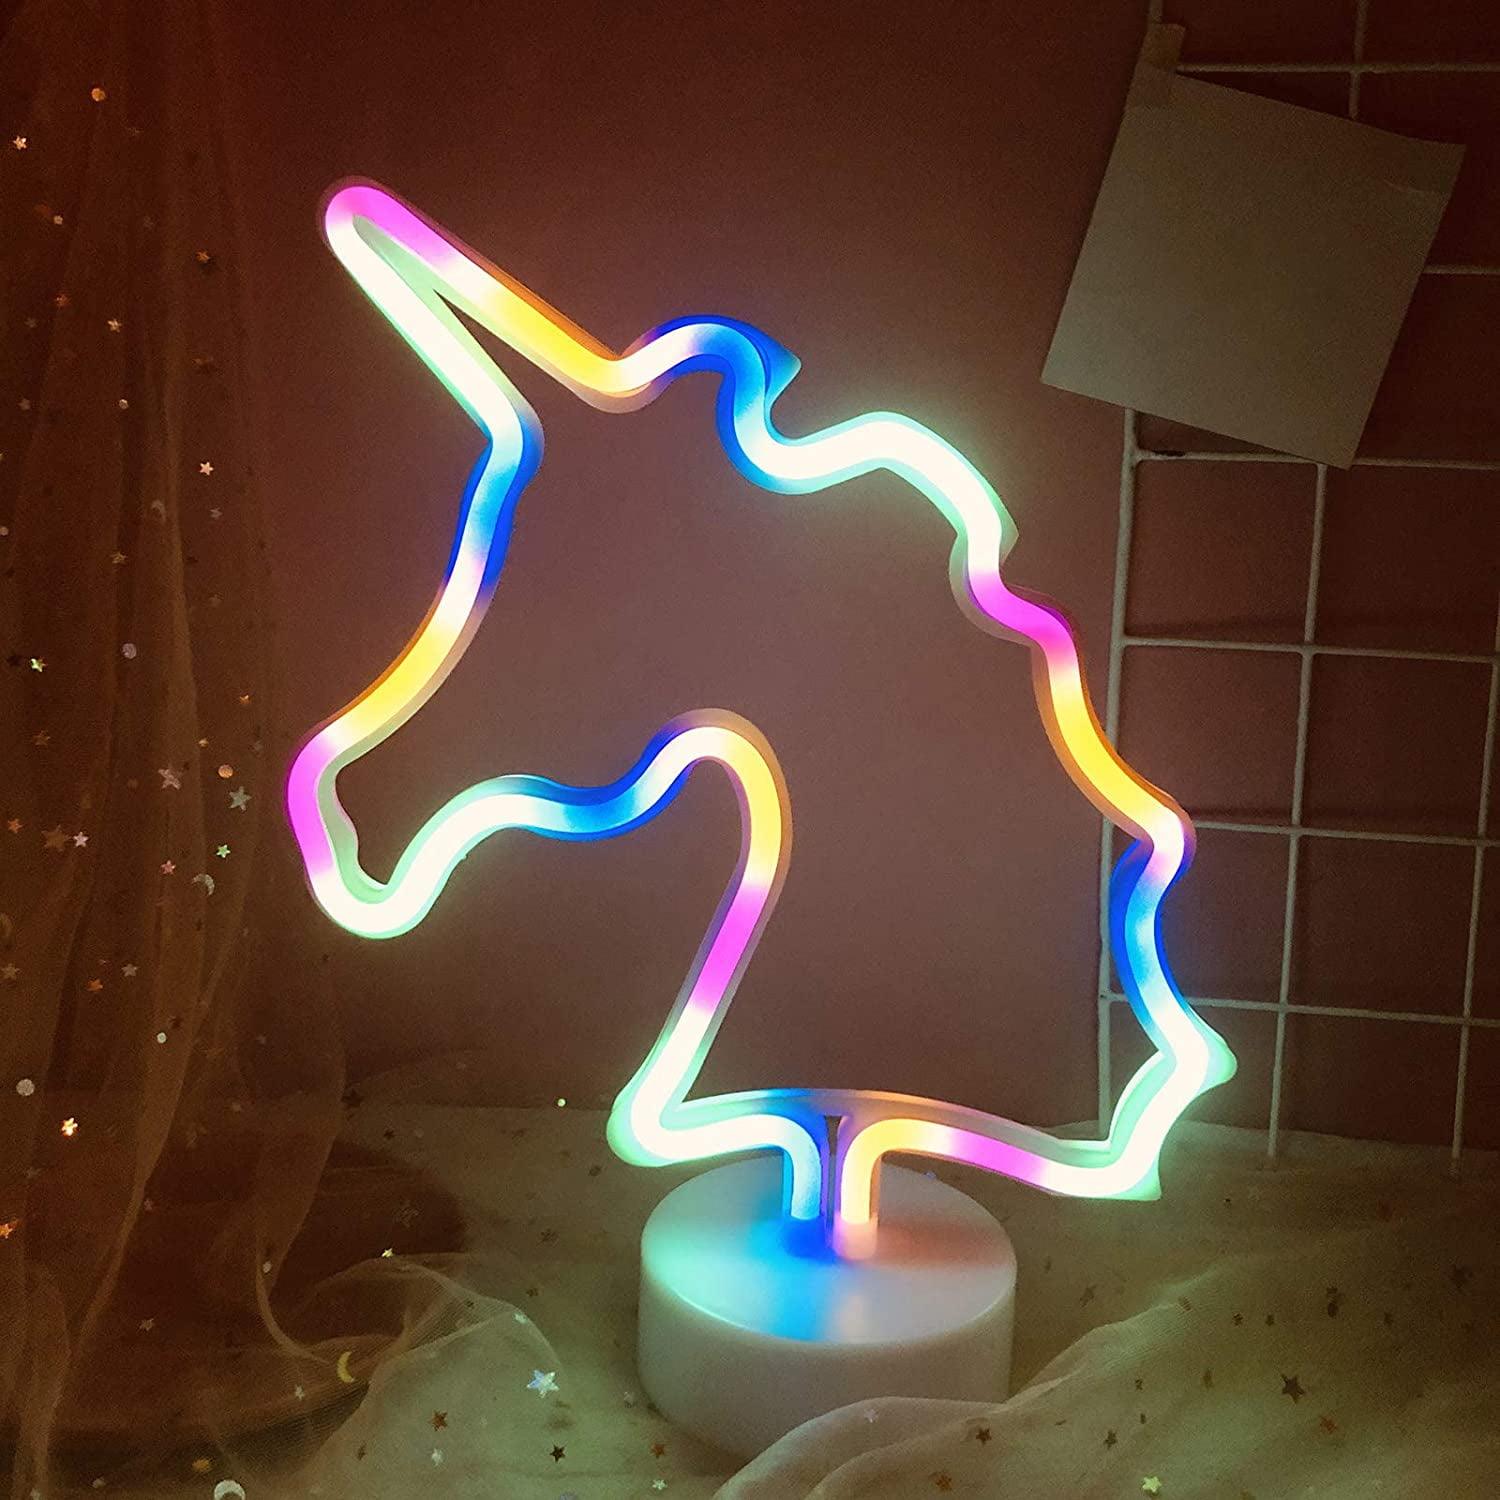 Details about   NEON SIGN LIGHT CAT Glow Night Lamp Kids Girls Bedroom Decoration Pink WANXING 